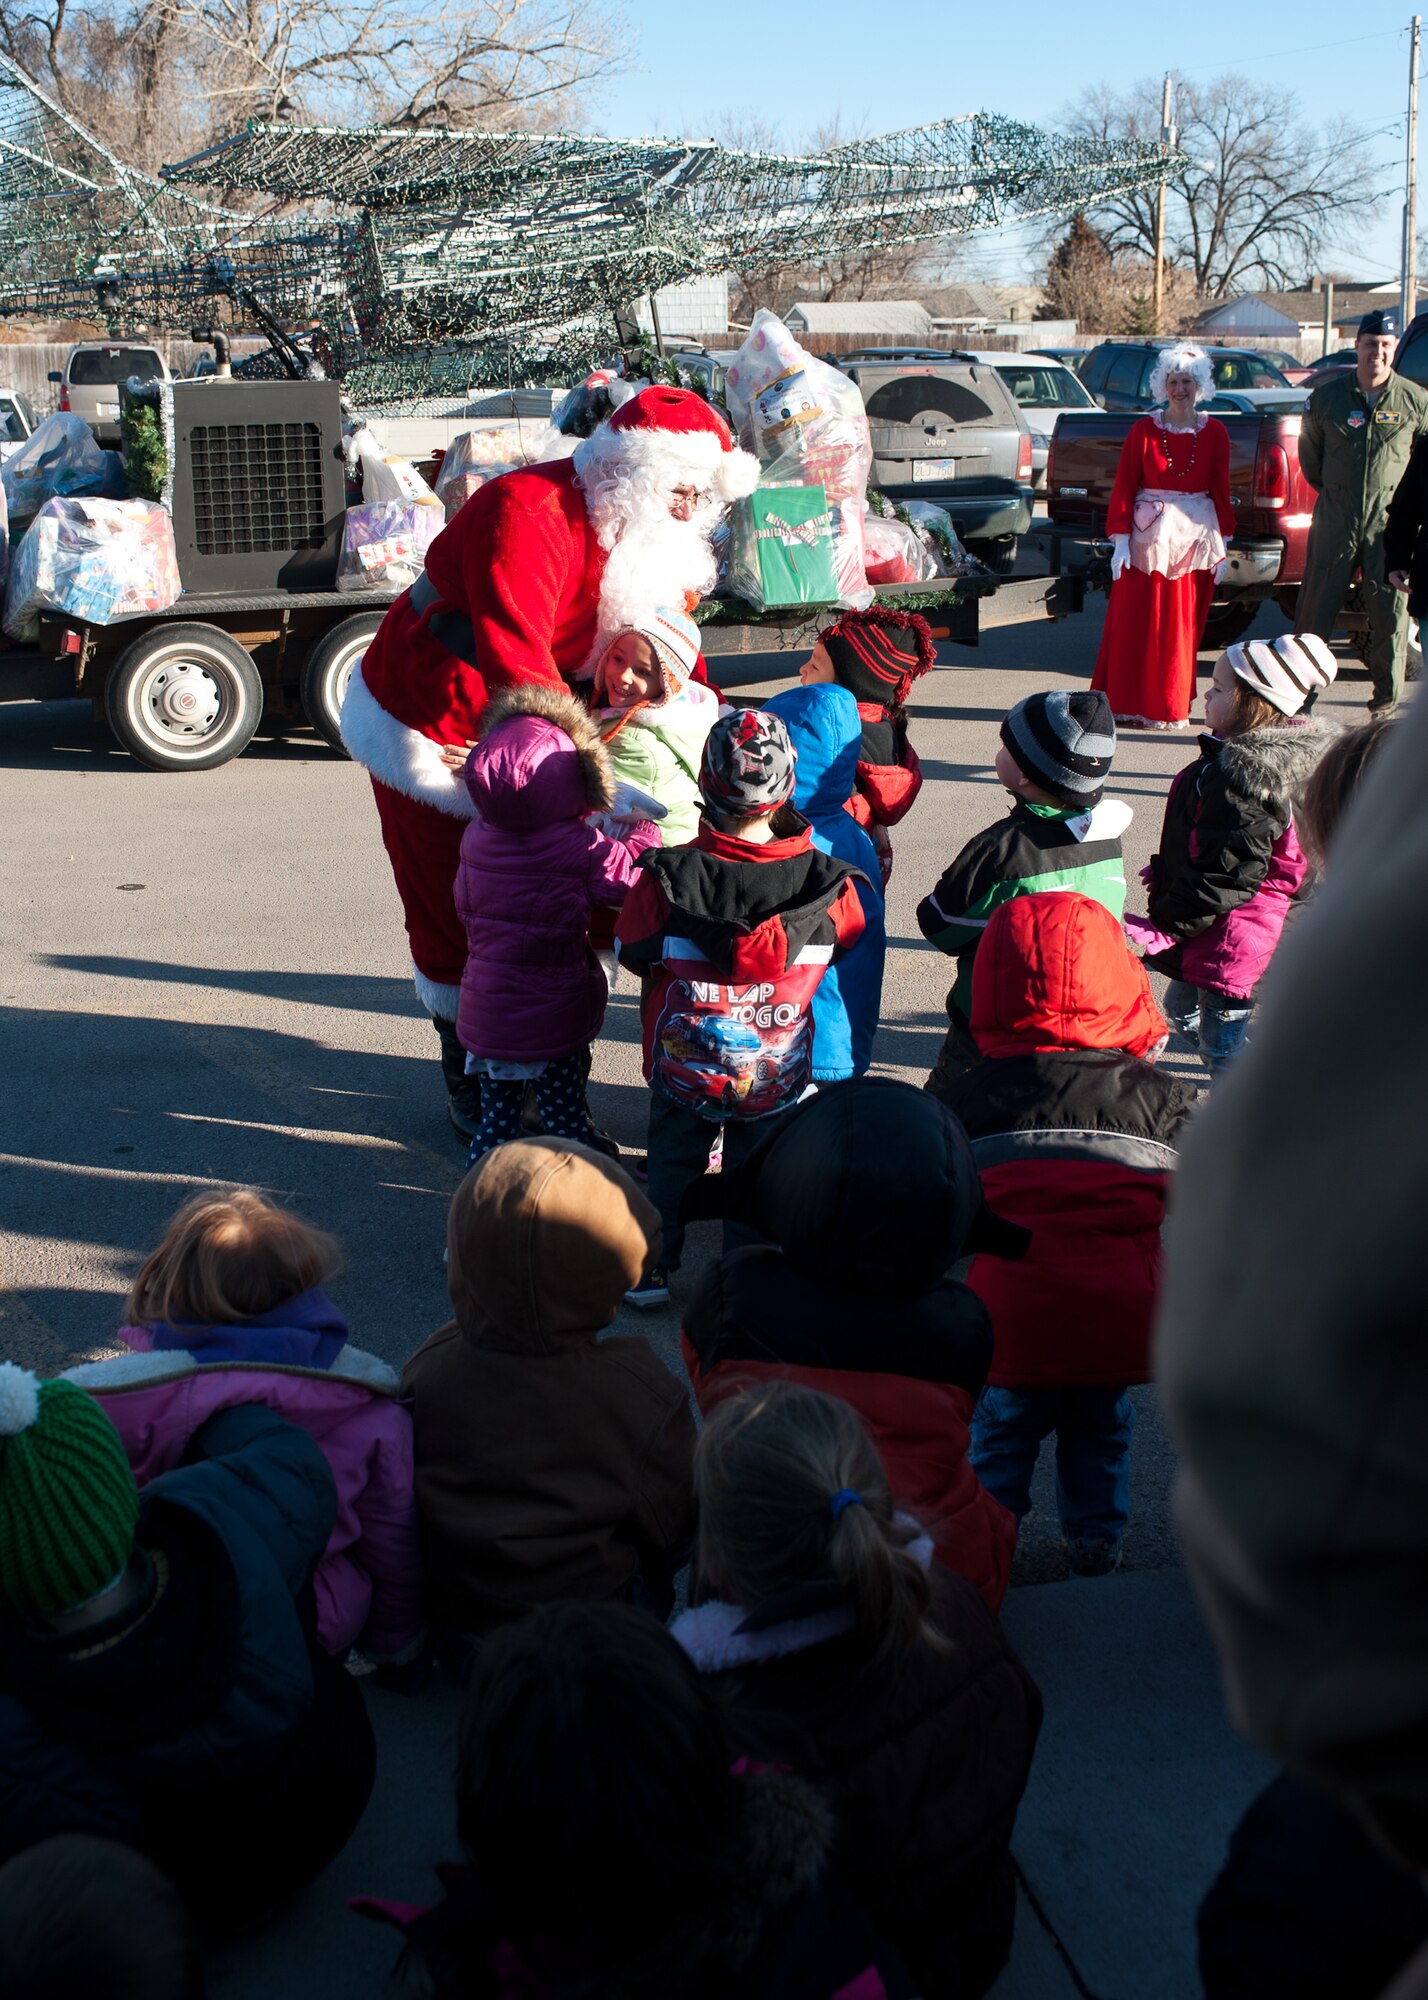 Children from the Youth & Family Services Child Care program in Rapid City, S.D. run up to greet Santa as he arrives aboard the Ellsworth Air Force Base, S.D. Festival of Lights parade float, Dec. 15, 2011. The 28th Operations Group invited Santa and Mrs. Claus to help hand out more than 180 gifts to the children as part of the 28th OG Angel Tree program.  (U.S. Air Force photo by Airman Alystria Maurer/Released)